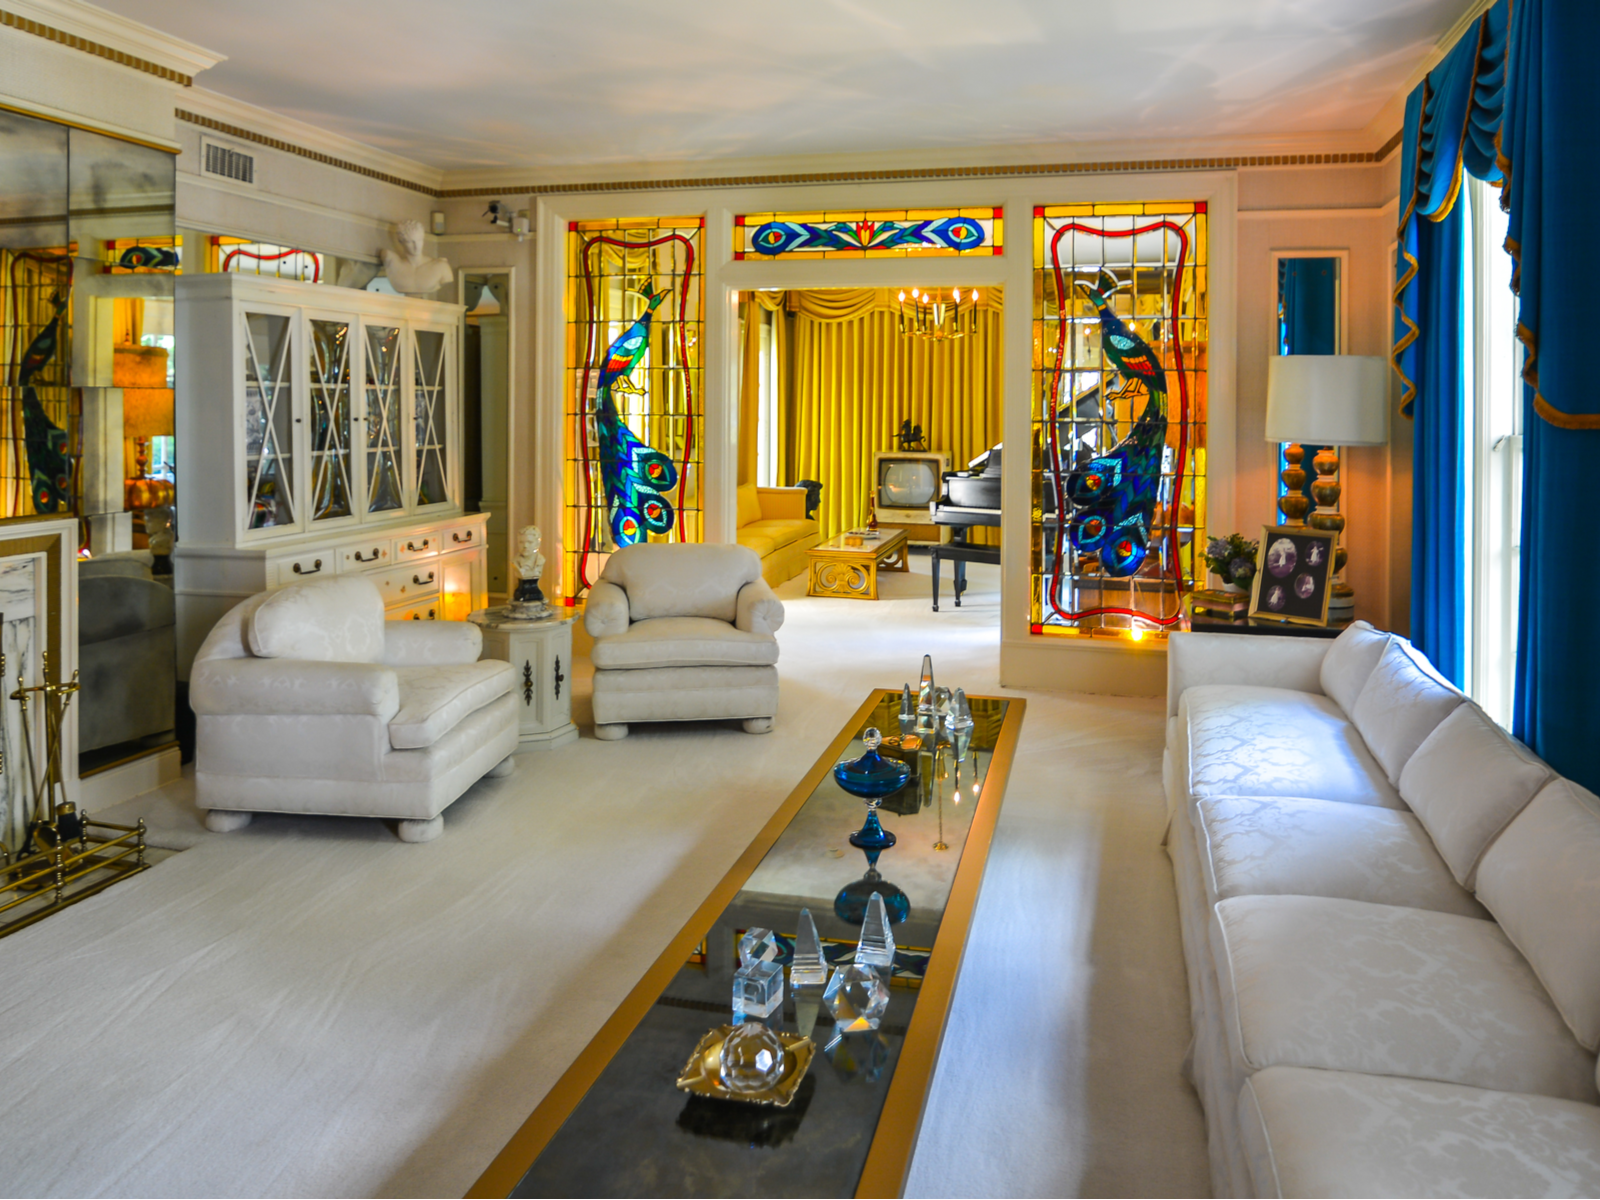 Living room of the famed Graceland Mansion, one of the best places to visit in Tennessee, which was once an abode of Elvis Presley with white and gold furnitures, white carpet, and stained glass depicting a peacock